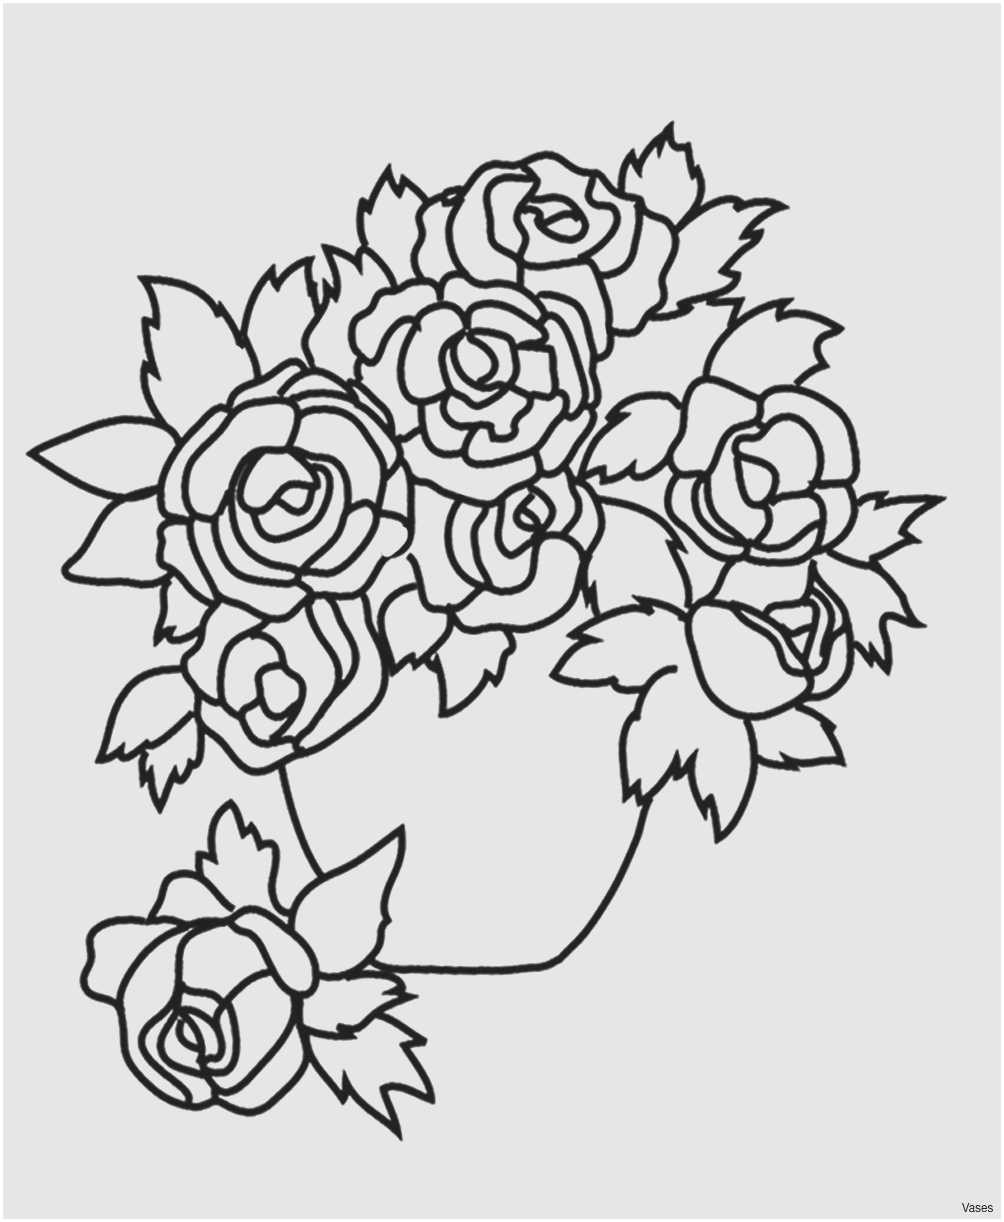 13 Awesome Flower Vase Garden 2024 free download flower vase garden of 16 lovely flowers in a tall white vase bogekompresorturkiye com with regard to vases flowers in vase coloring pages a flower top i 0d flowers awesome